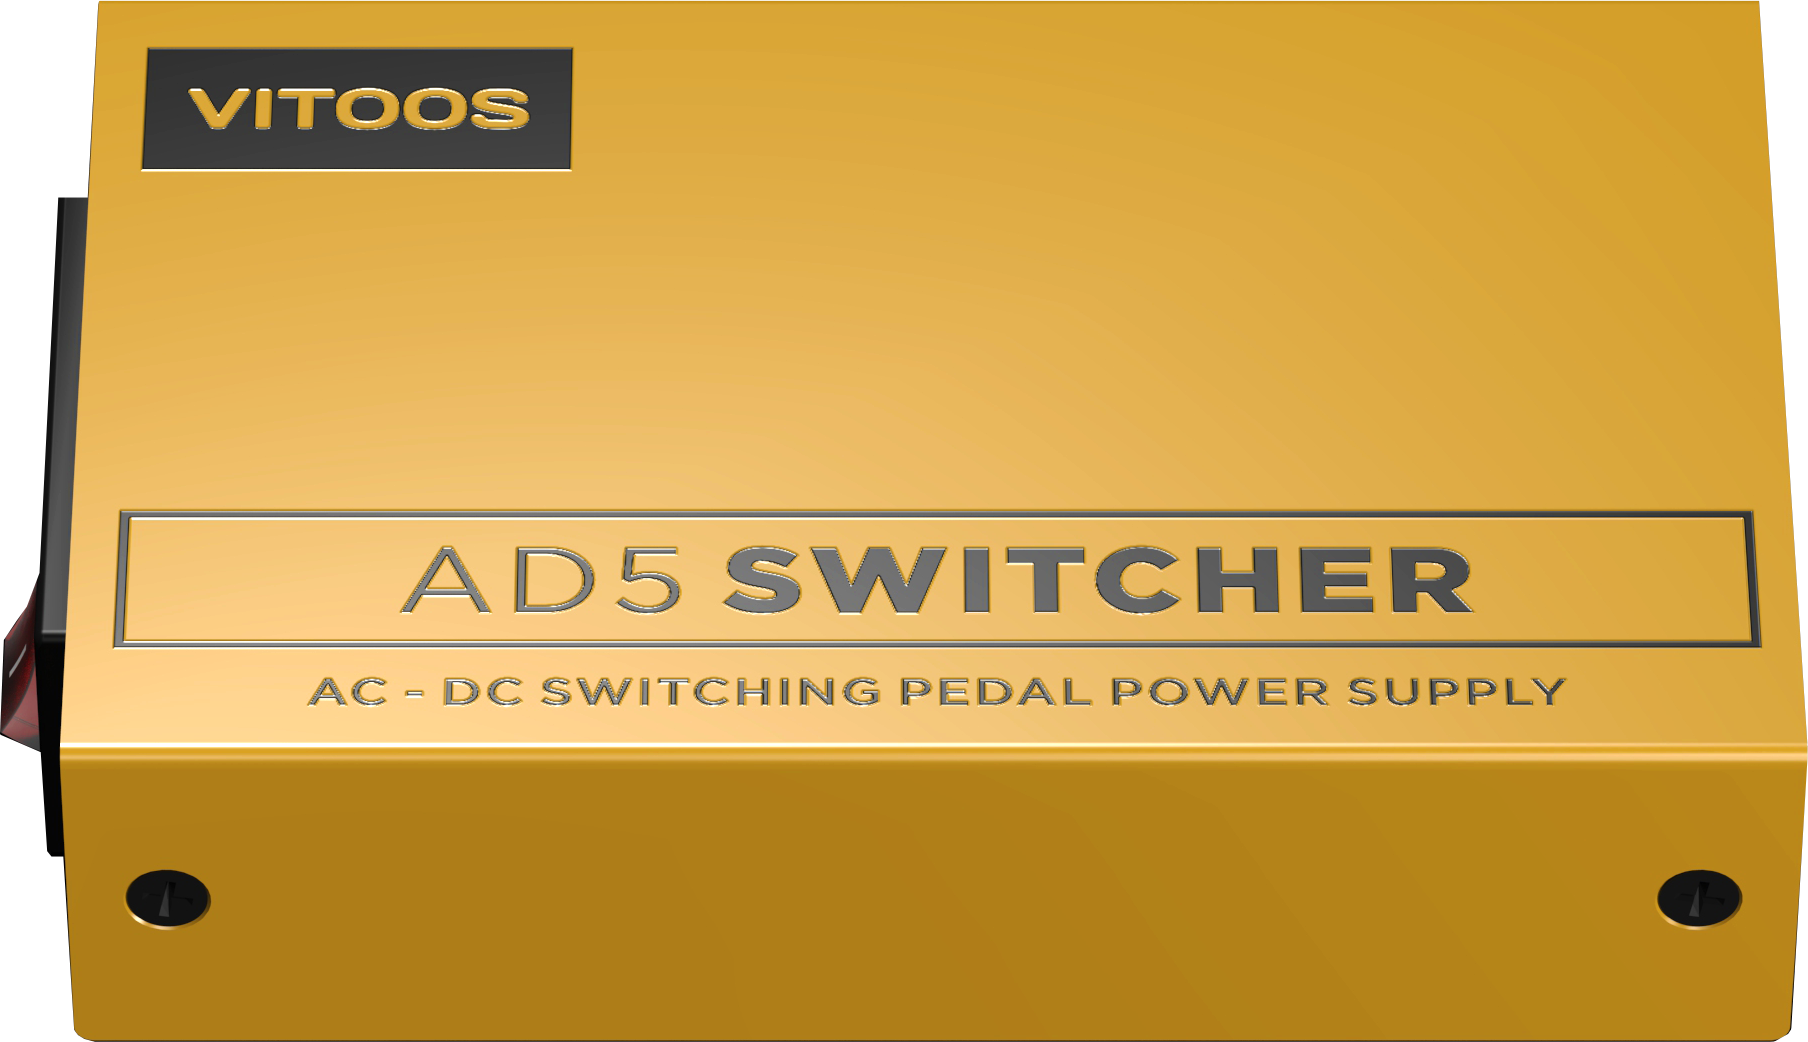 Vitoos AD5 Switcher AC-DC Switching Pedal Power Supply